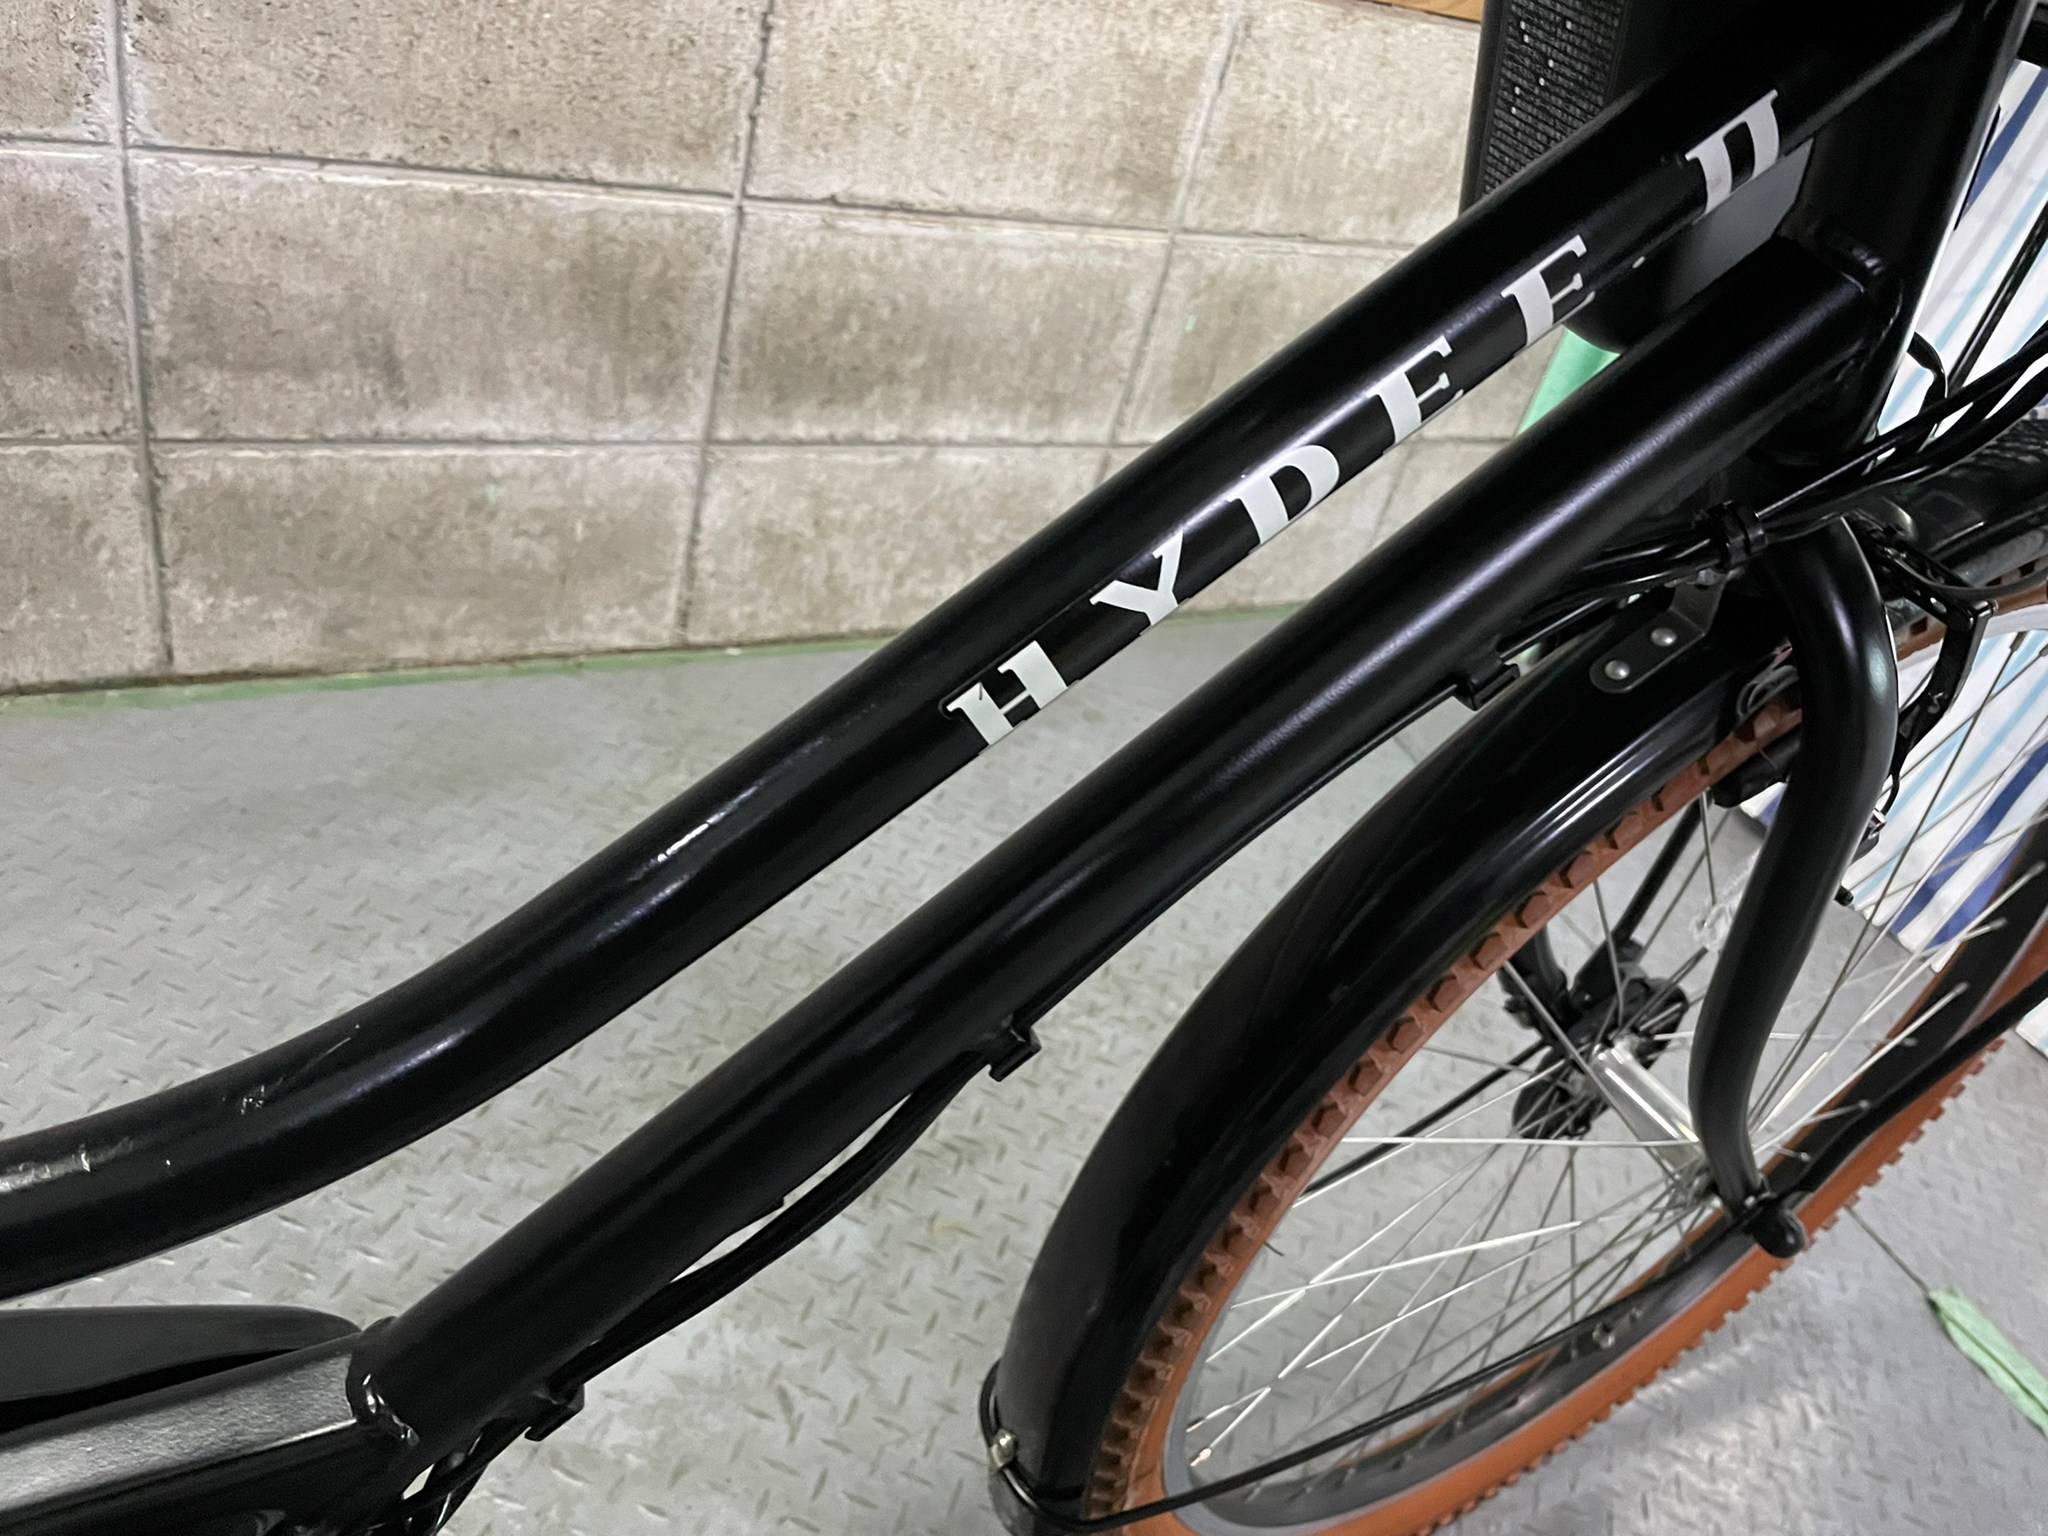 【SOLD OUT】電動自転車 ブリヂストン HYDEE.Ⅱ 26インチ 子供乗せ 3人乗り適合 8.7Ah 黒 | 国産・中古の激安電動